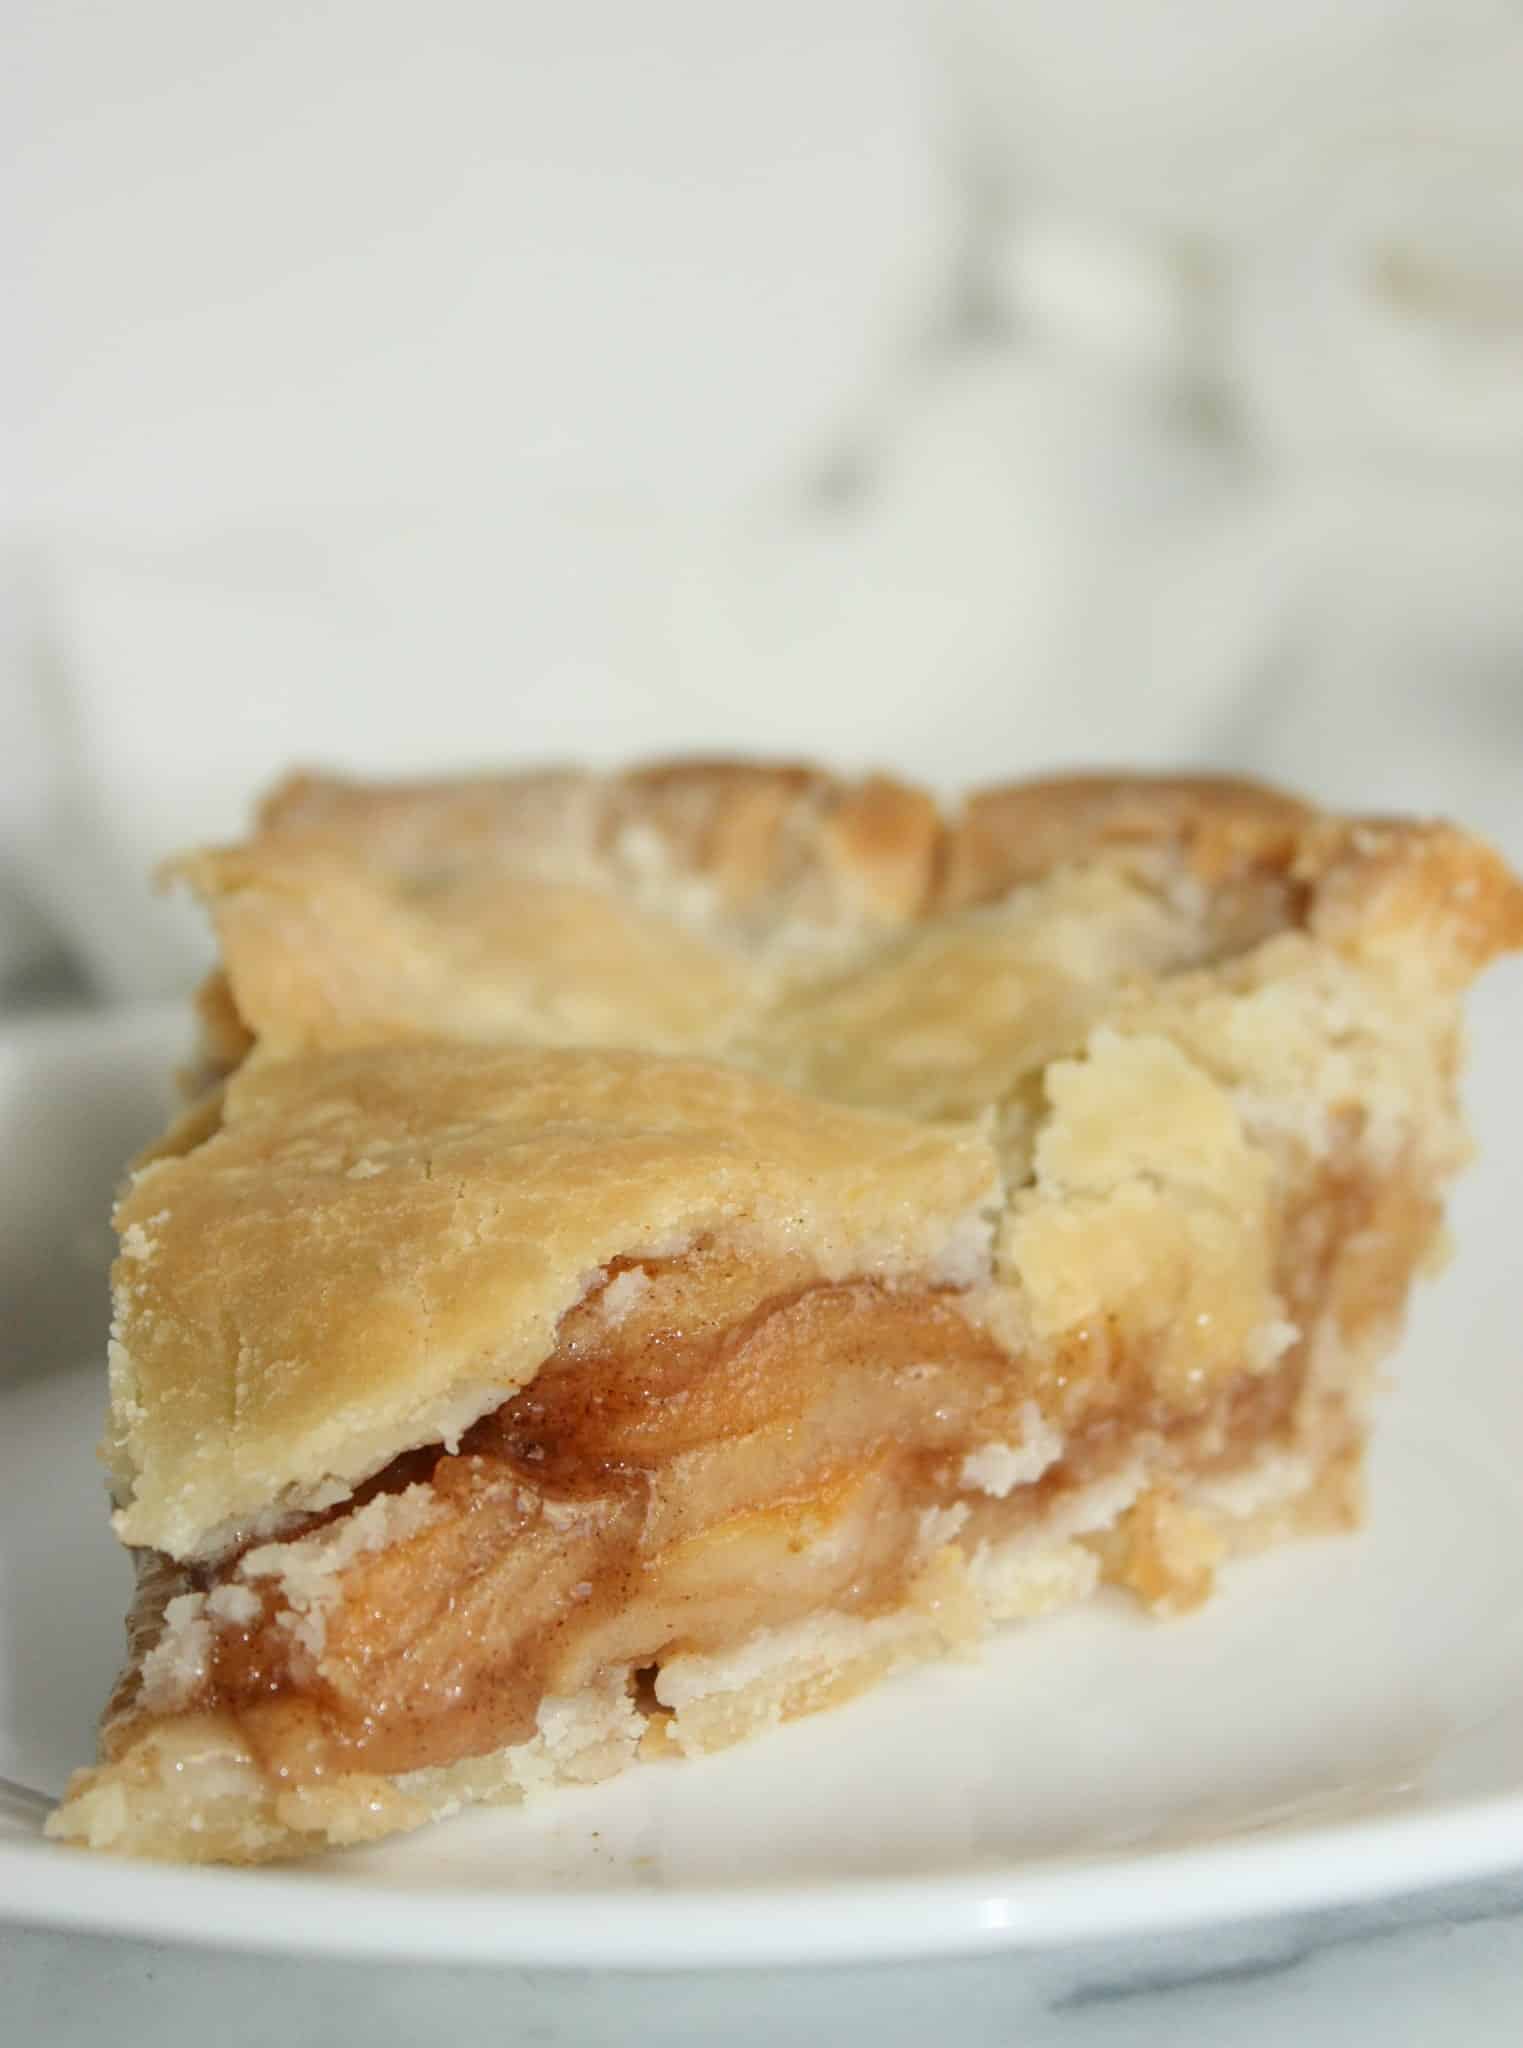 Apple Pie is a great way to use up some of our wind fall apples.  I look forward to this tasty dessert every year when the trees are laden with apples.